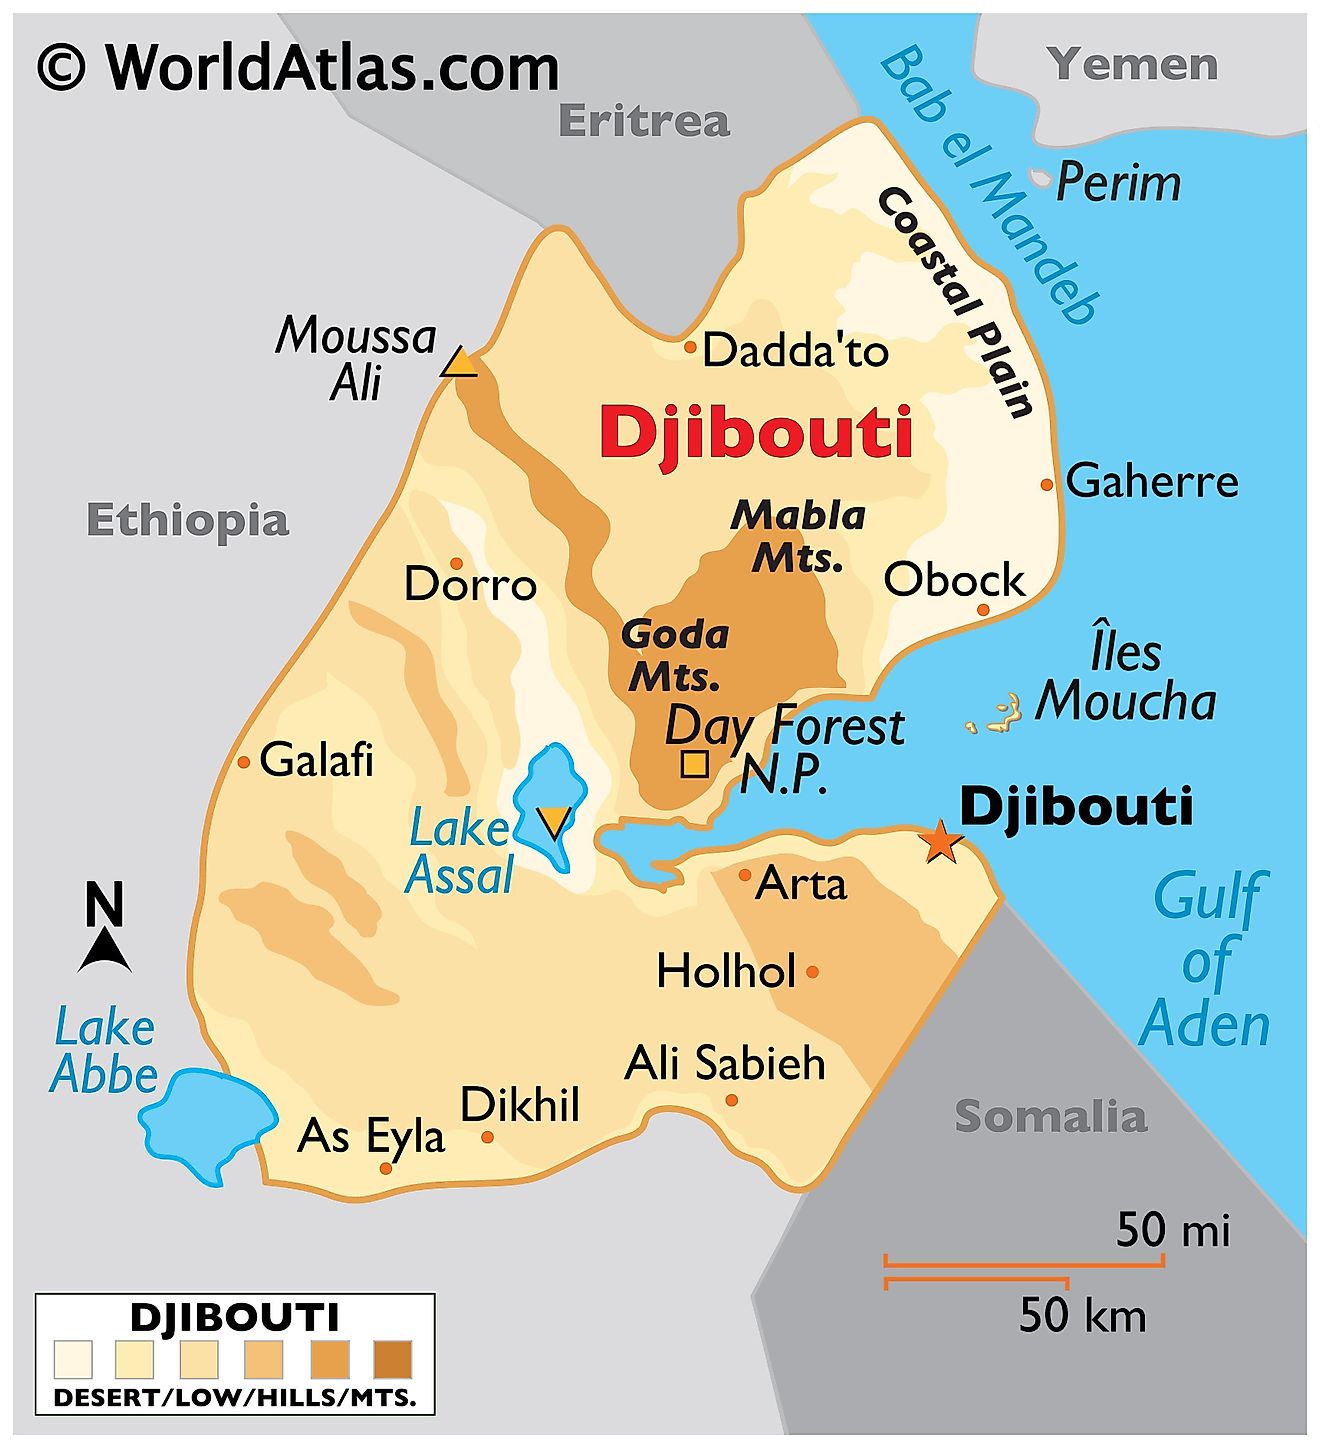 Physical Map of Djibouti with state boundaries, relief, mountain ranges, major lakes, and important cities.